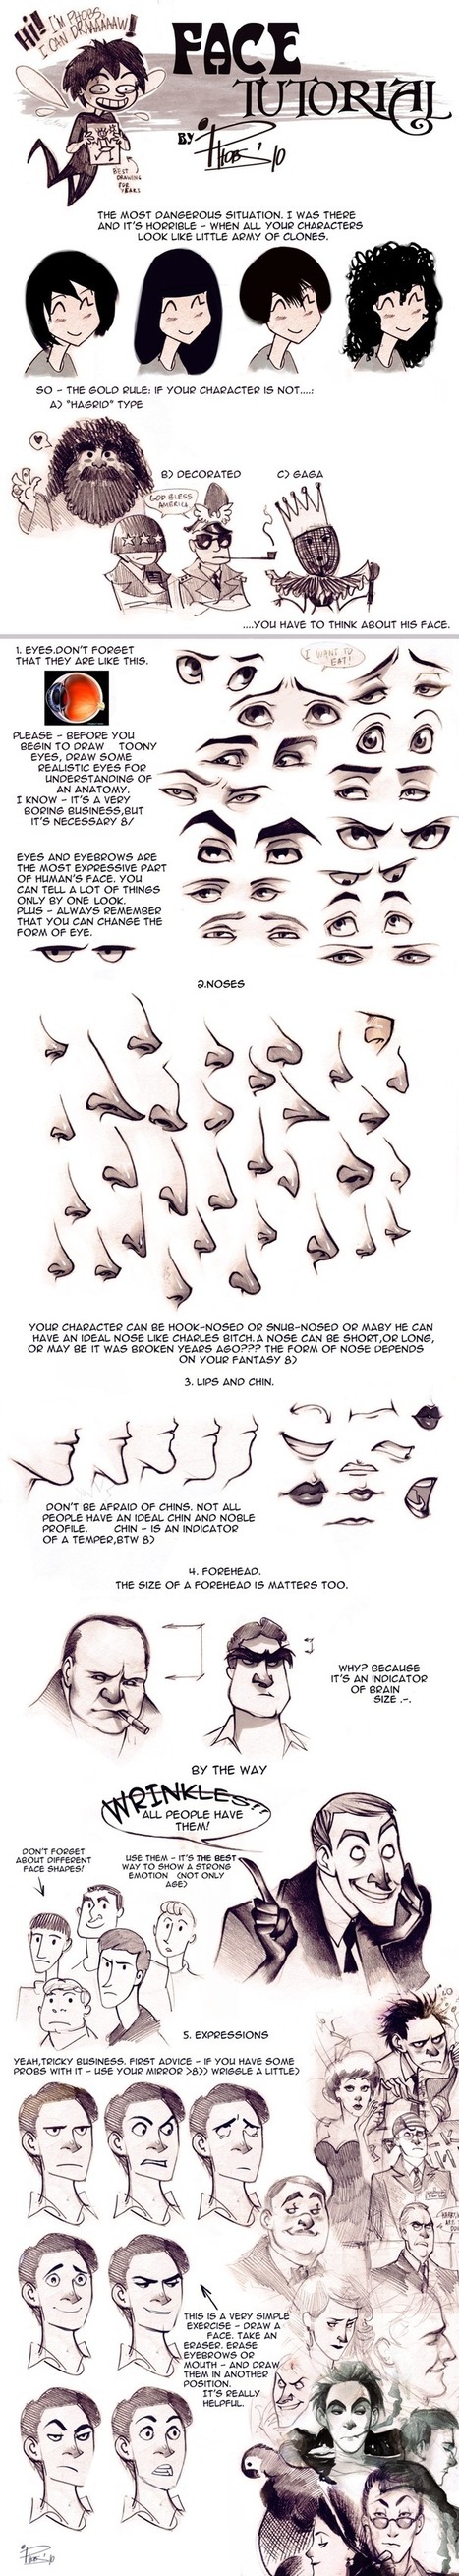 face tutorial | Drawing and Painting Tutorials | Scoop.it